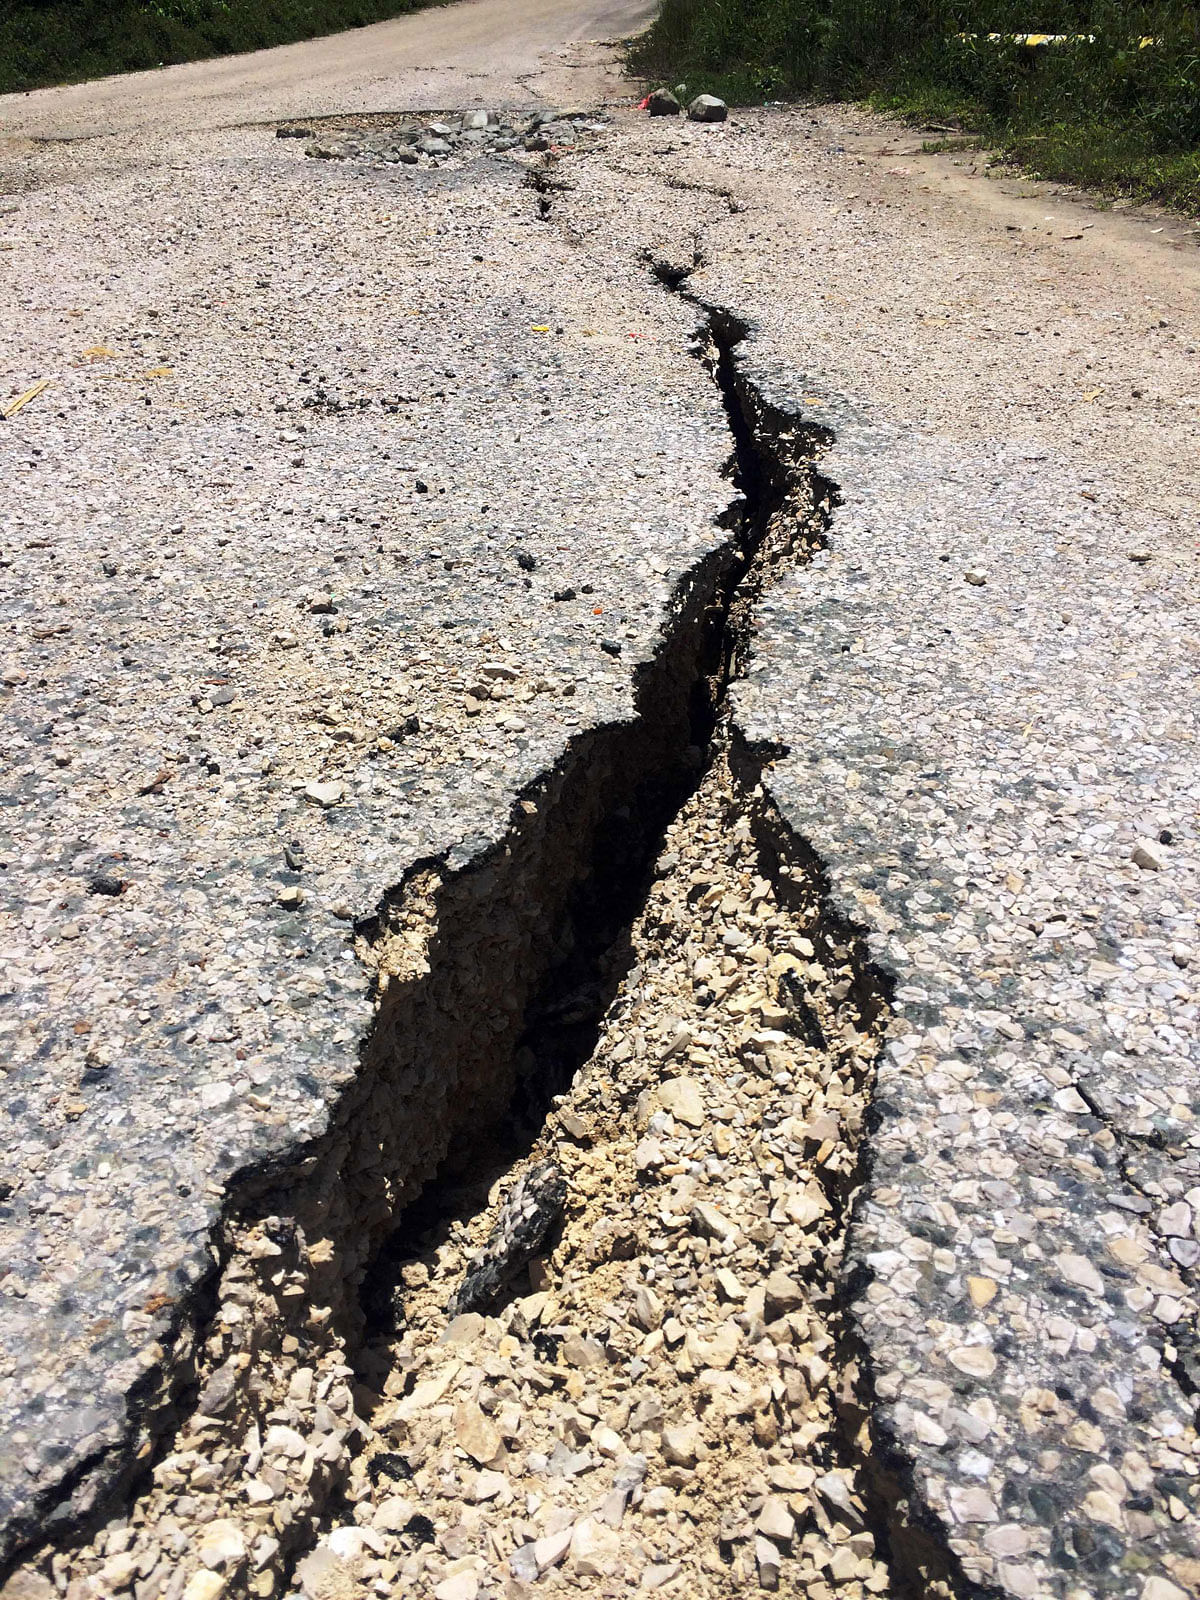 A damaged road after an earthquake near Mandi district, north-west of Papua New Guinea’s capital city of Port Moresby. AFP file photo